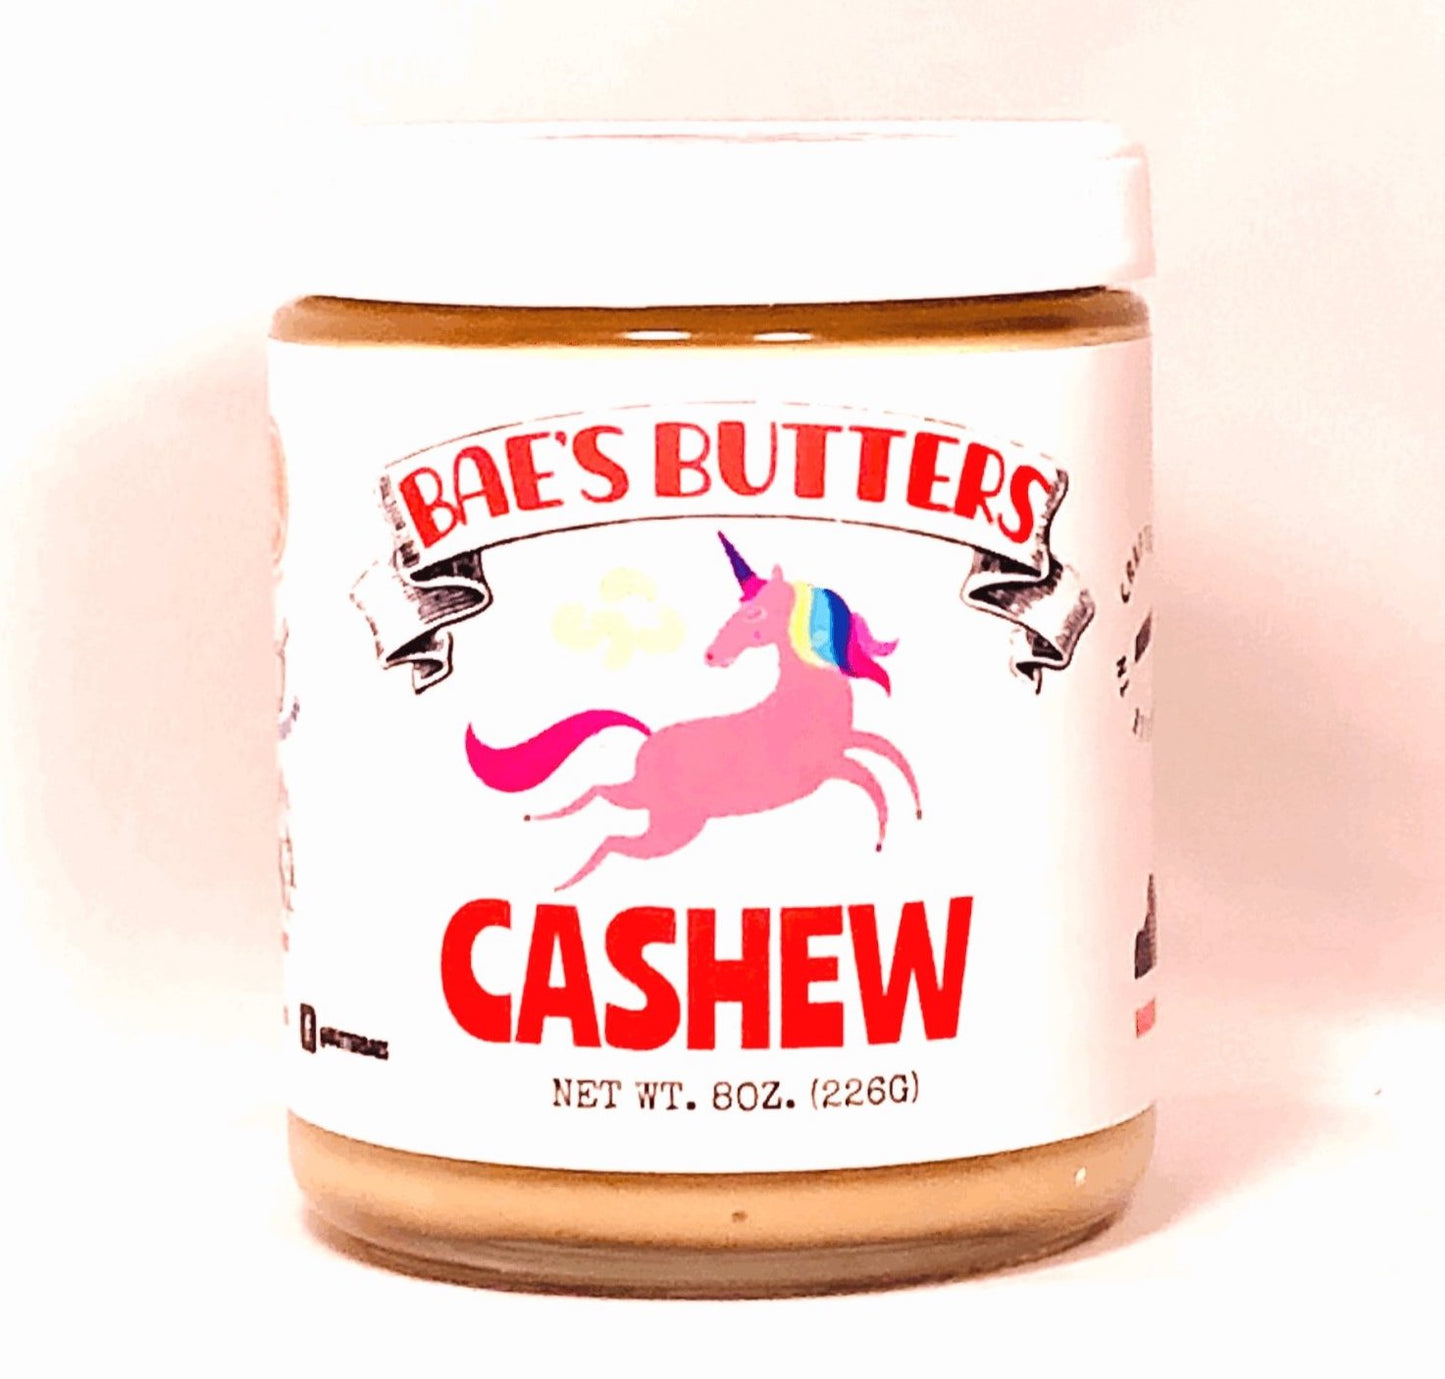 Cashew Butter by Bae's Butters